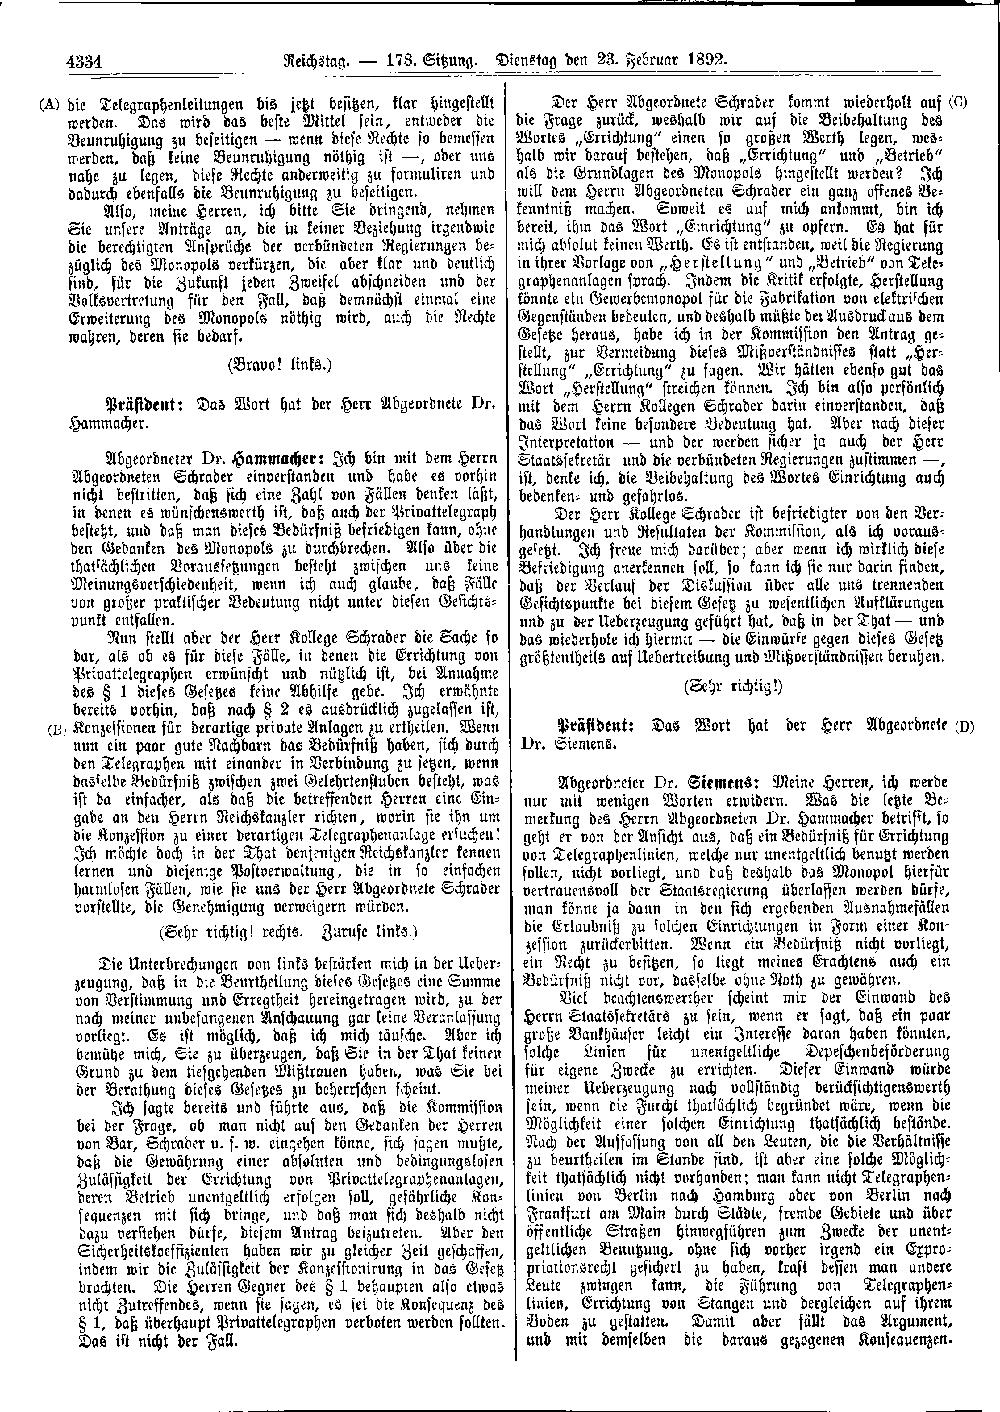 Scan of page 4334